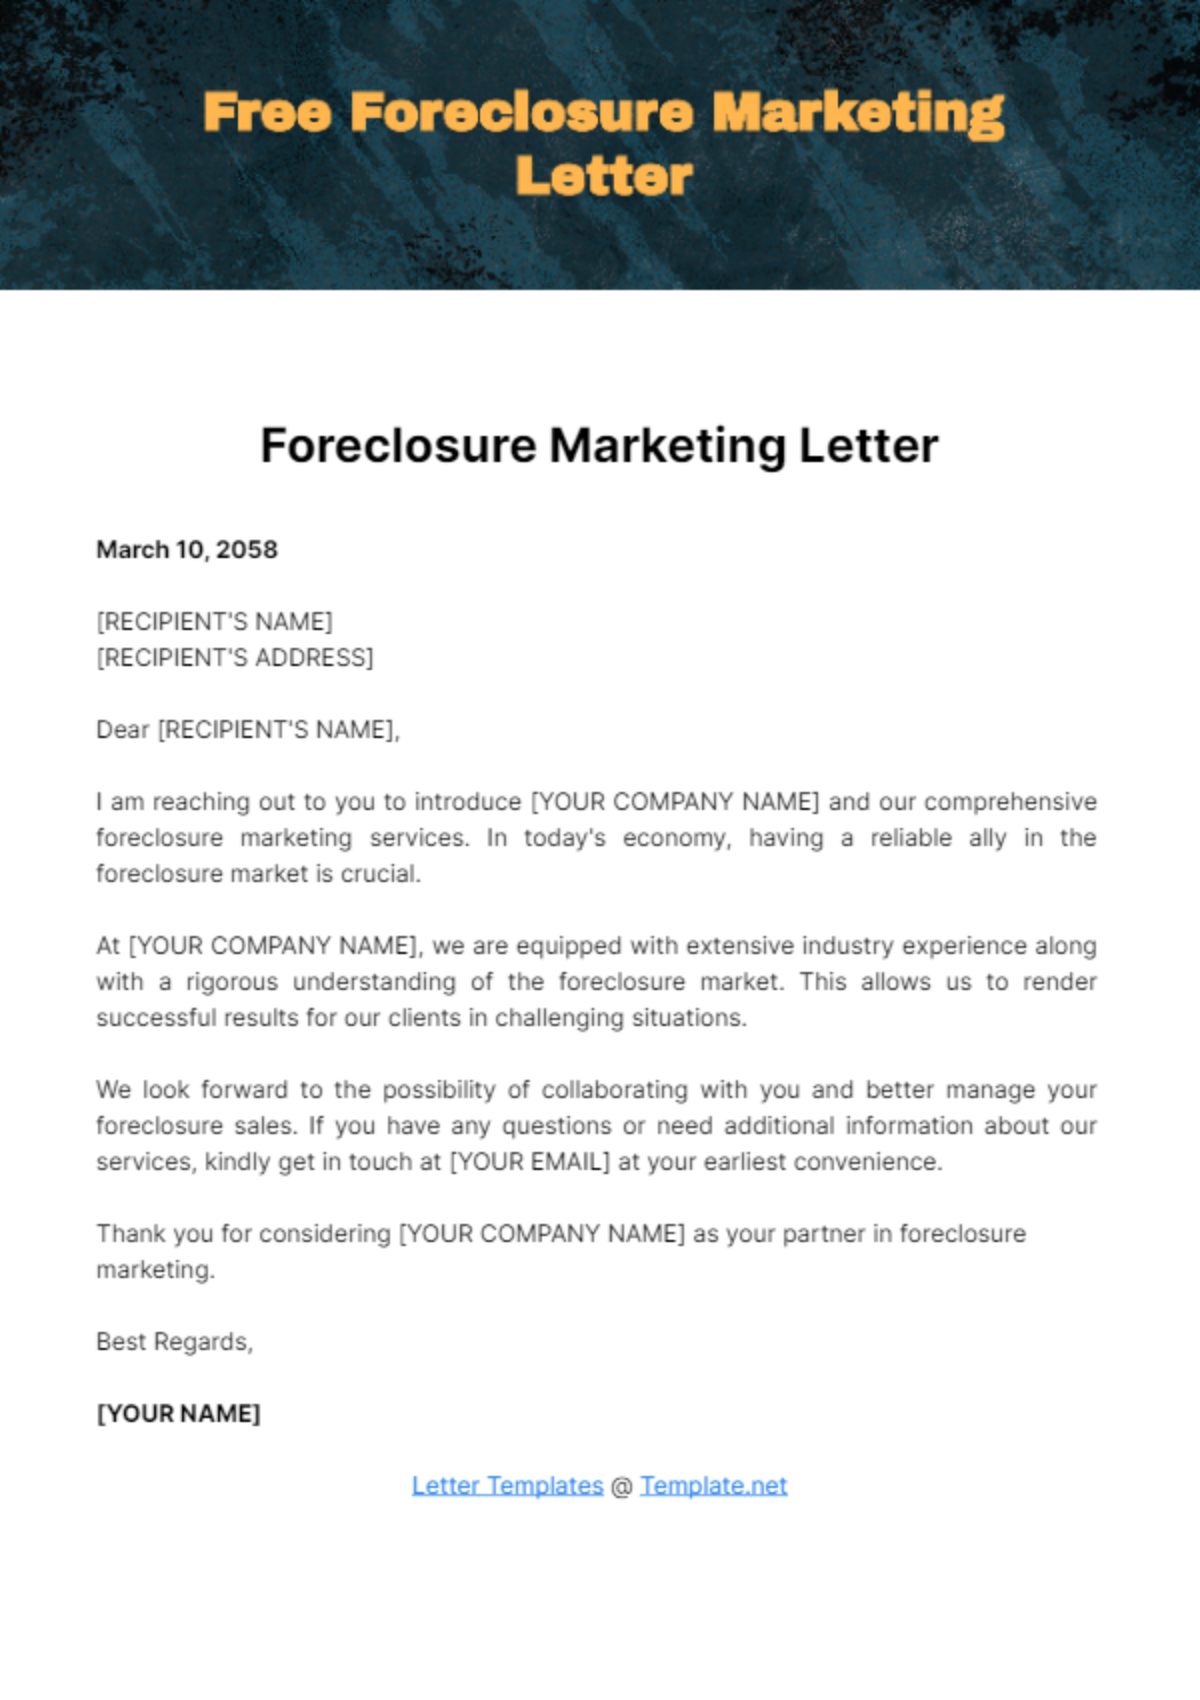 Free Foreclosure Marketing Letter Template